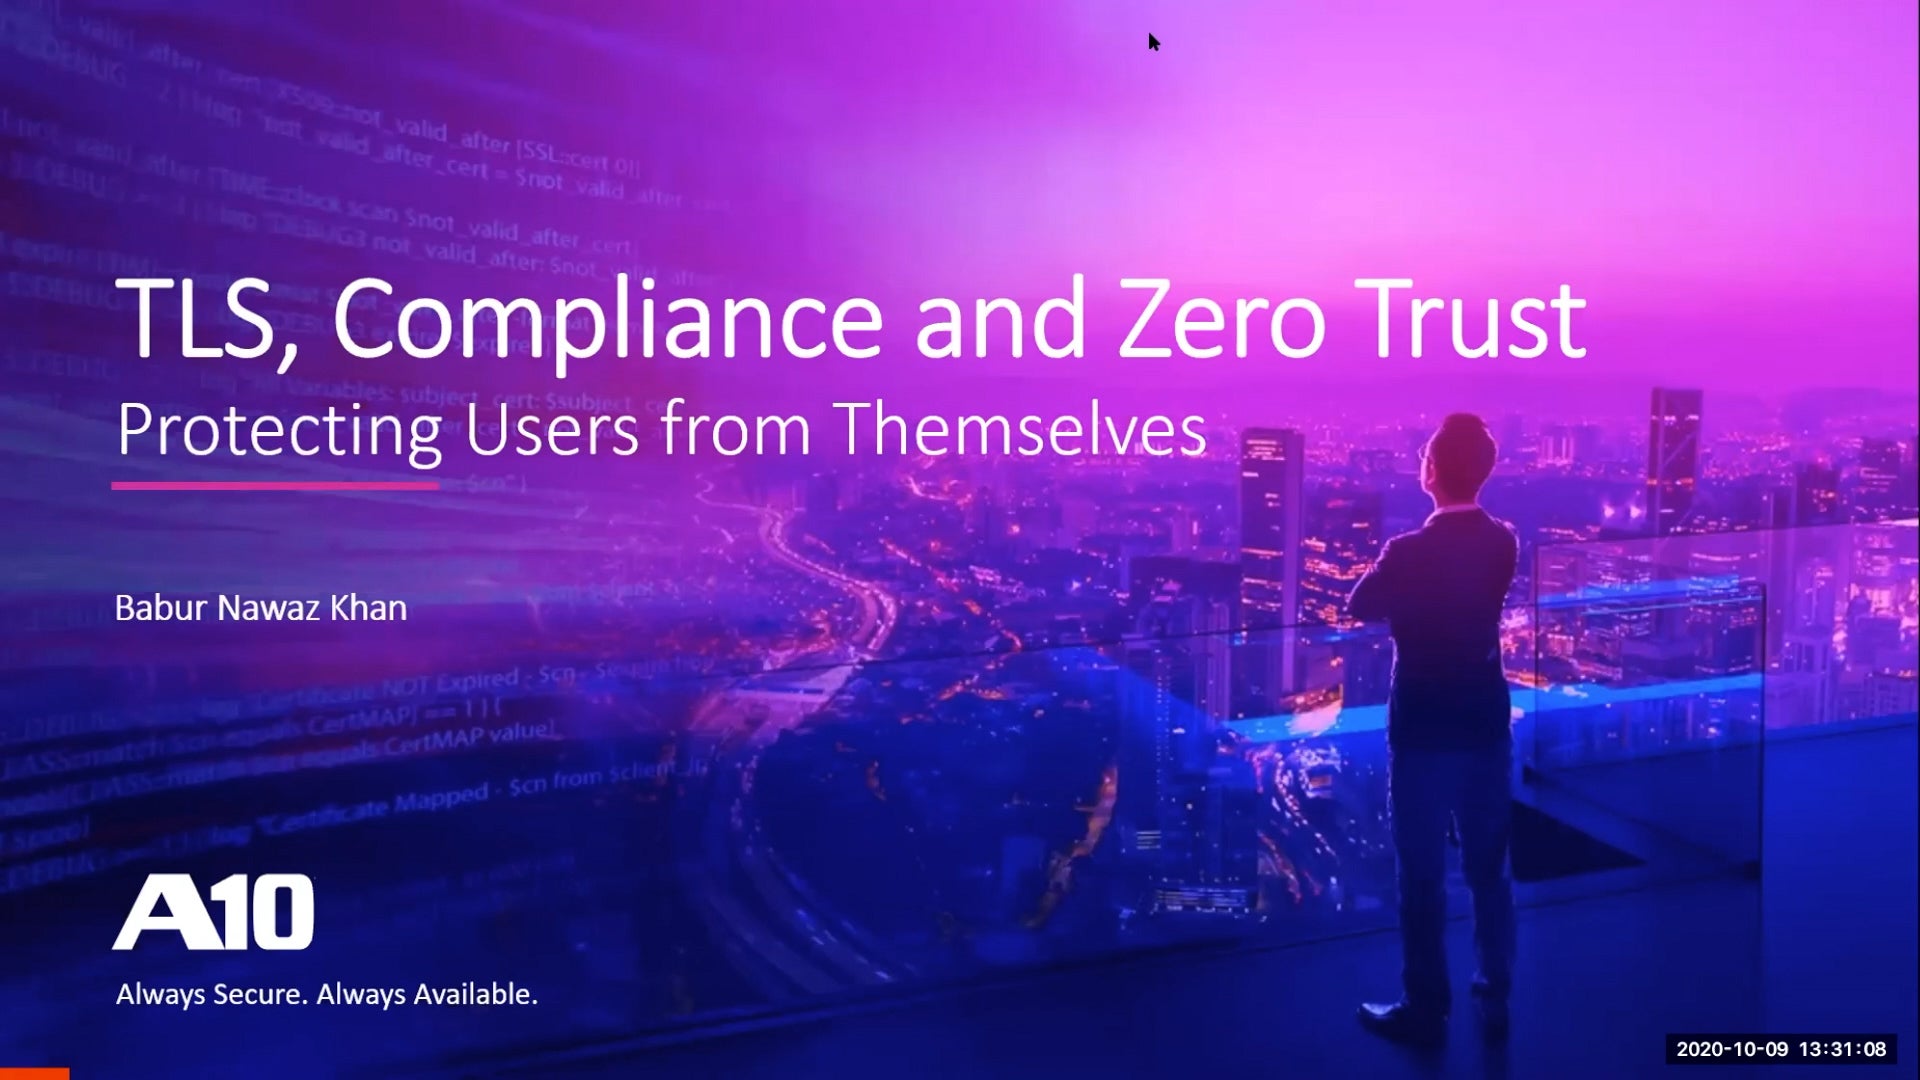 TLS, Compliance and Zero Trust - Protecting Users from Cyberattacks